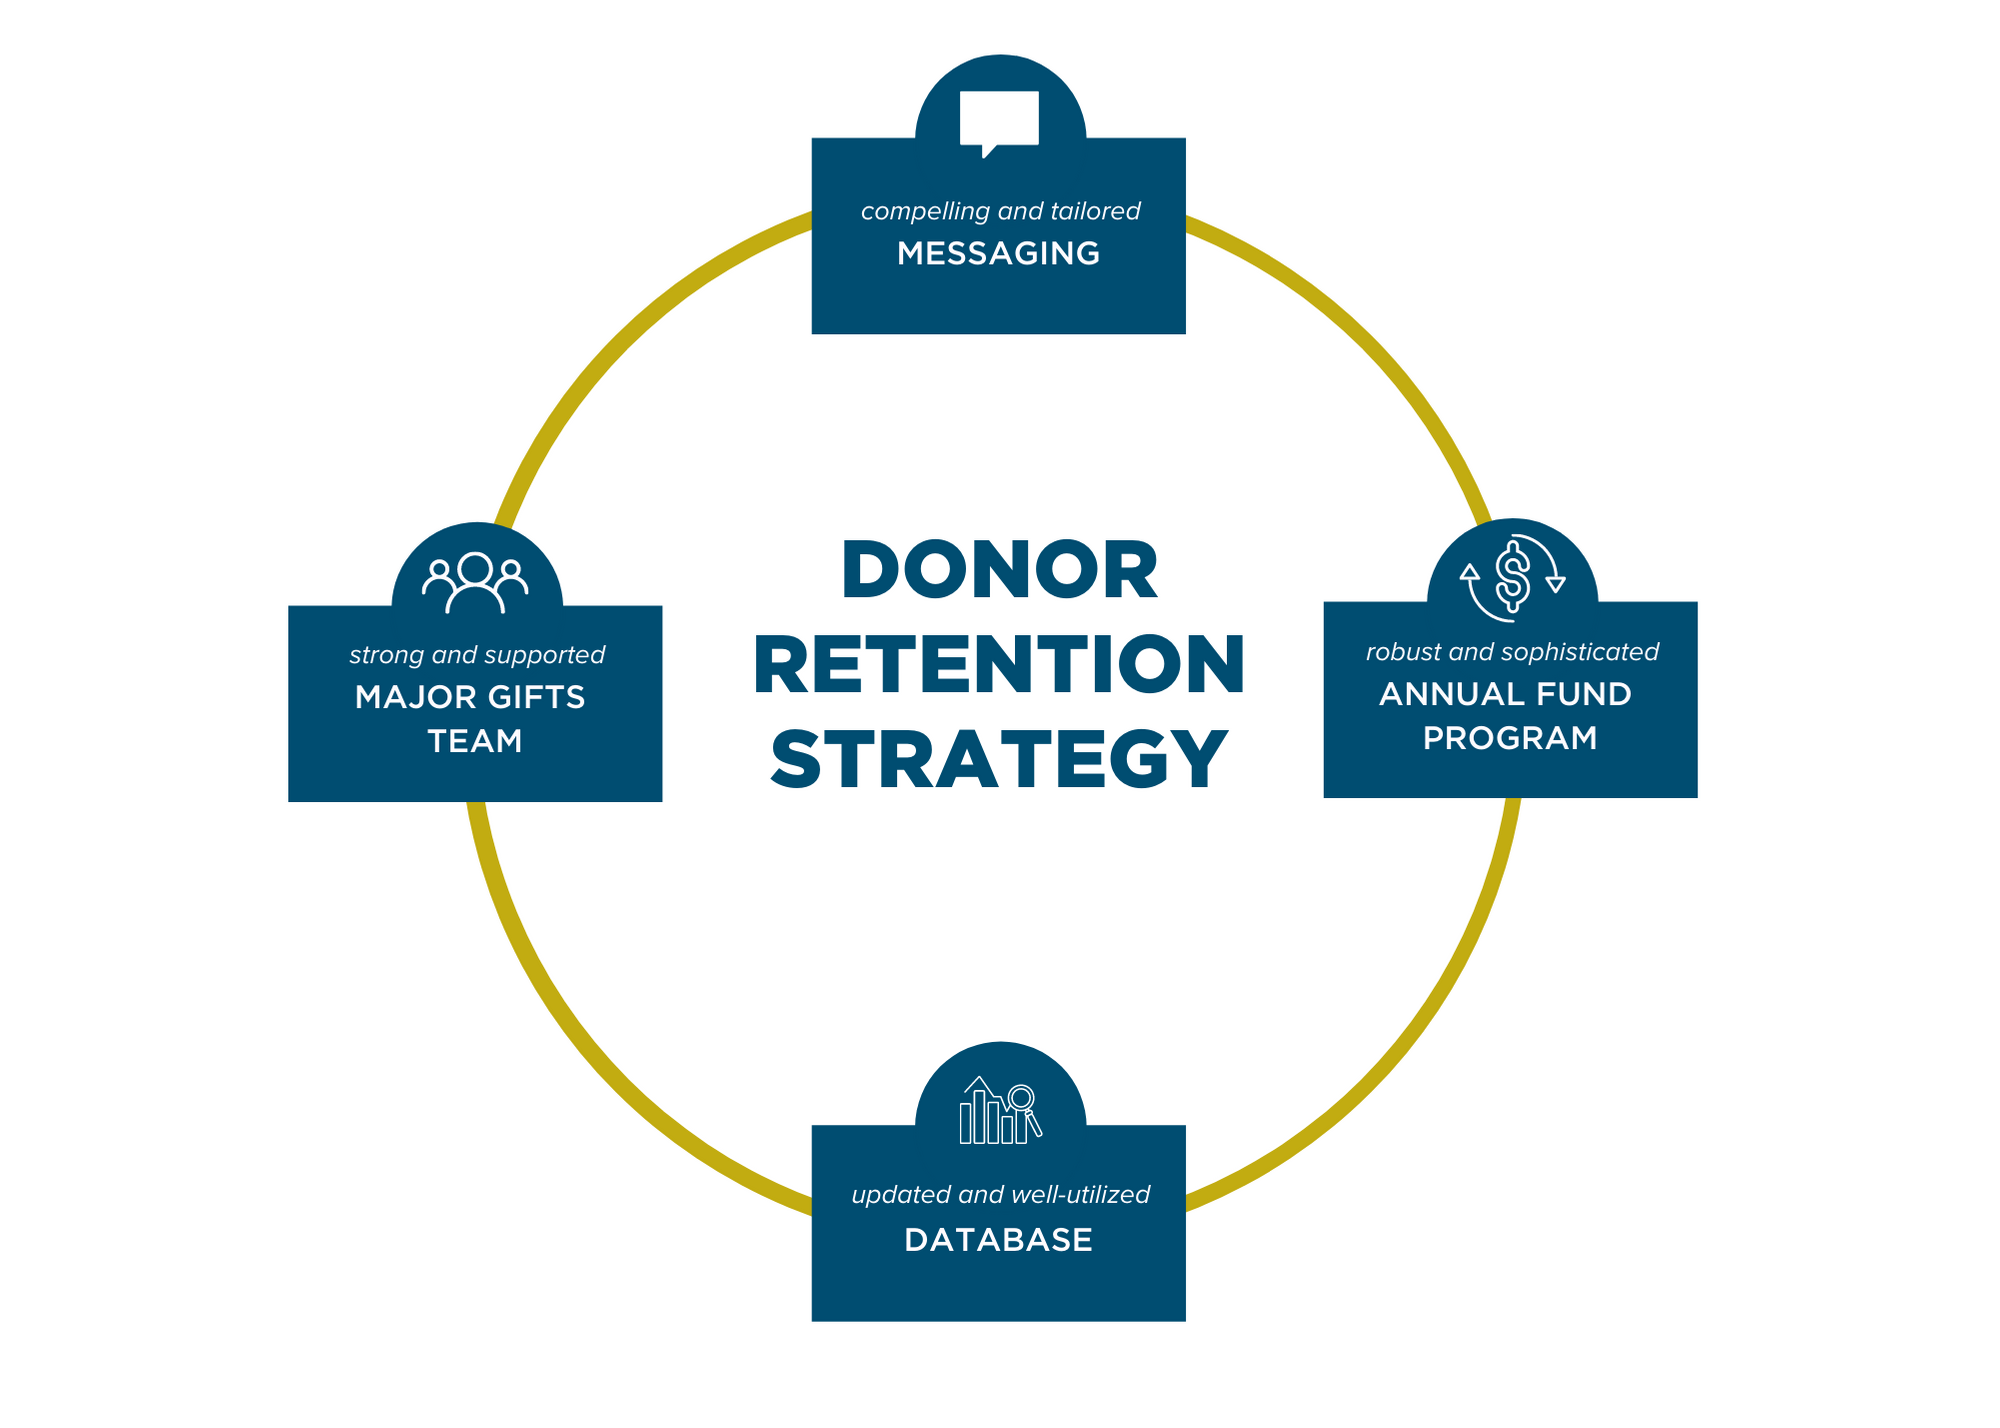 Donor Retention Strategy graphic